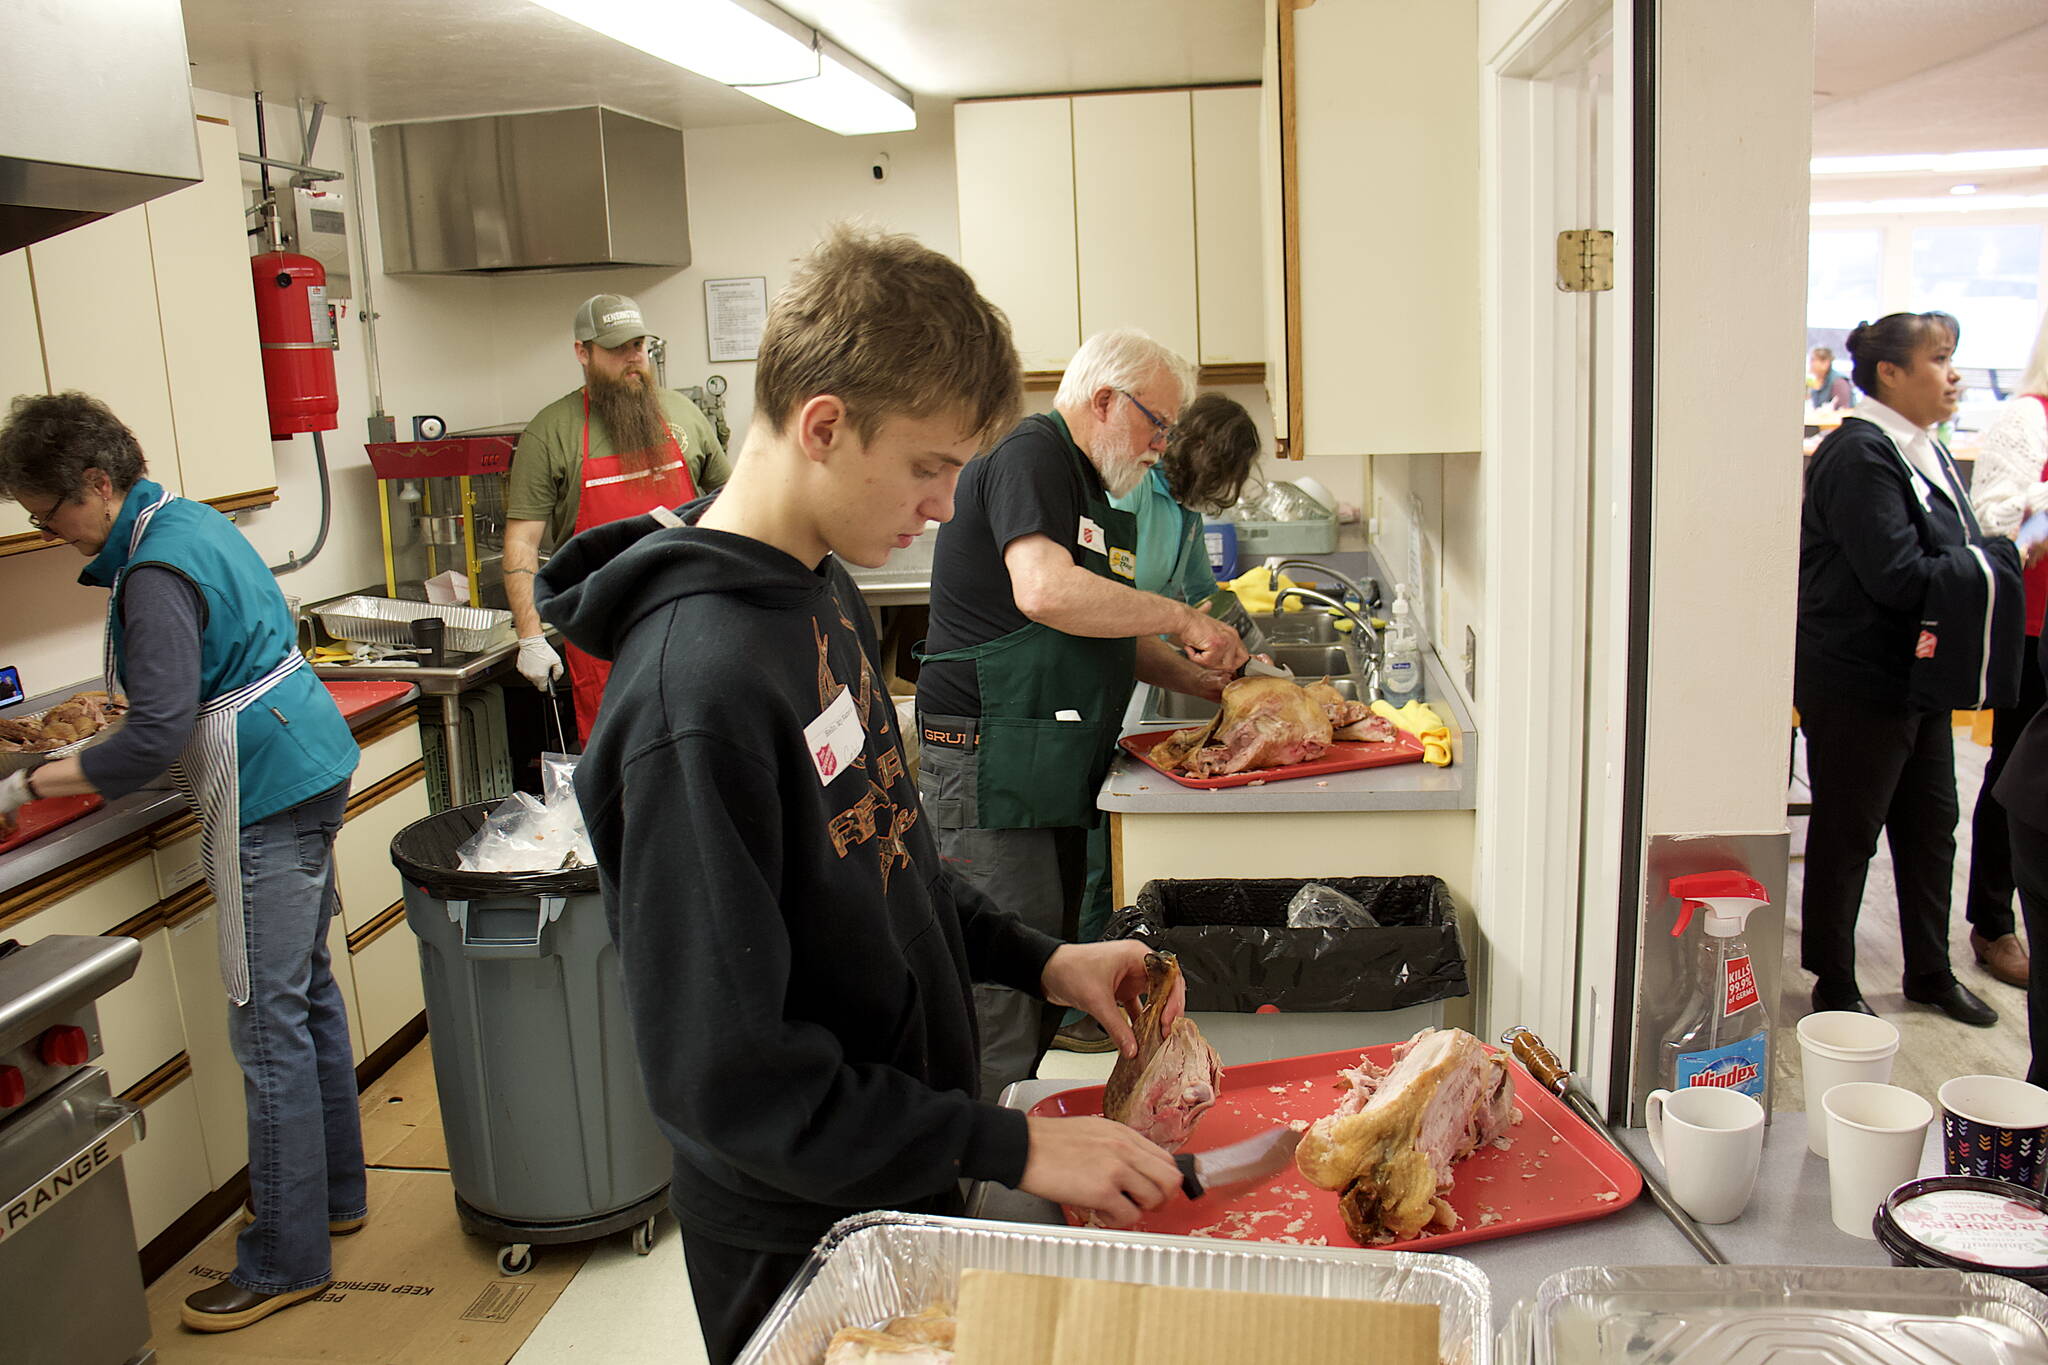 Caleb Friend, 16, and his grandfather, Jerry Harmon, carve turkeys in the kitchen of the Juneau Yacht Club before the serving of the annual communal Thanksgiving dinner at the Juneau Yacht Club. Friend, one of nine members of Harmon’s family volunteering during the day, said he has been helping since he started wrapping silverware at the age of six. Fifty turkeys were smoked for the gathering by Dick Hand, owner of Alaska Seafood Company. (Mark Sabbatini / Juneau Empire)